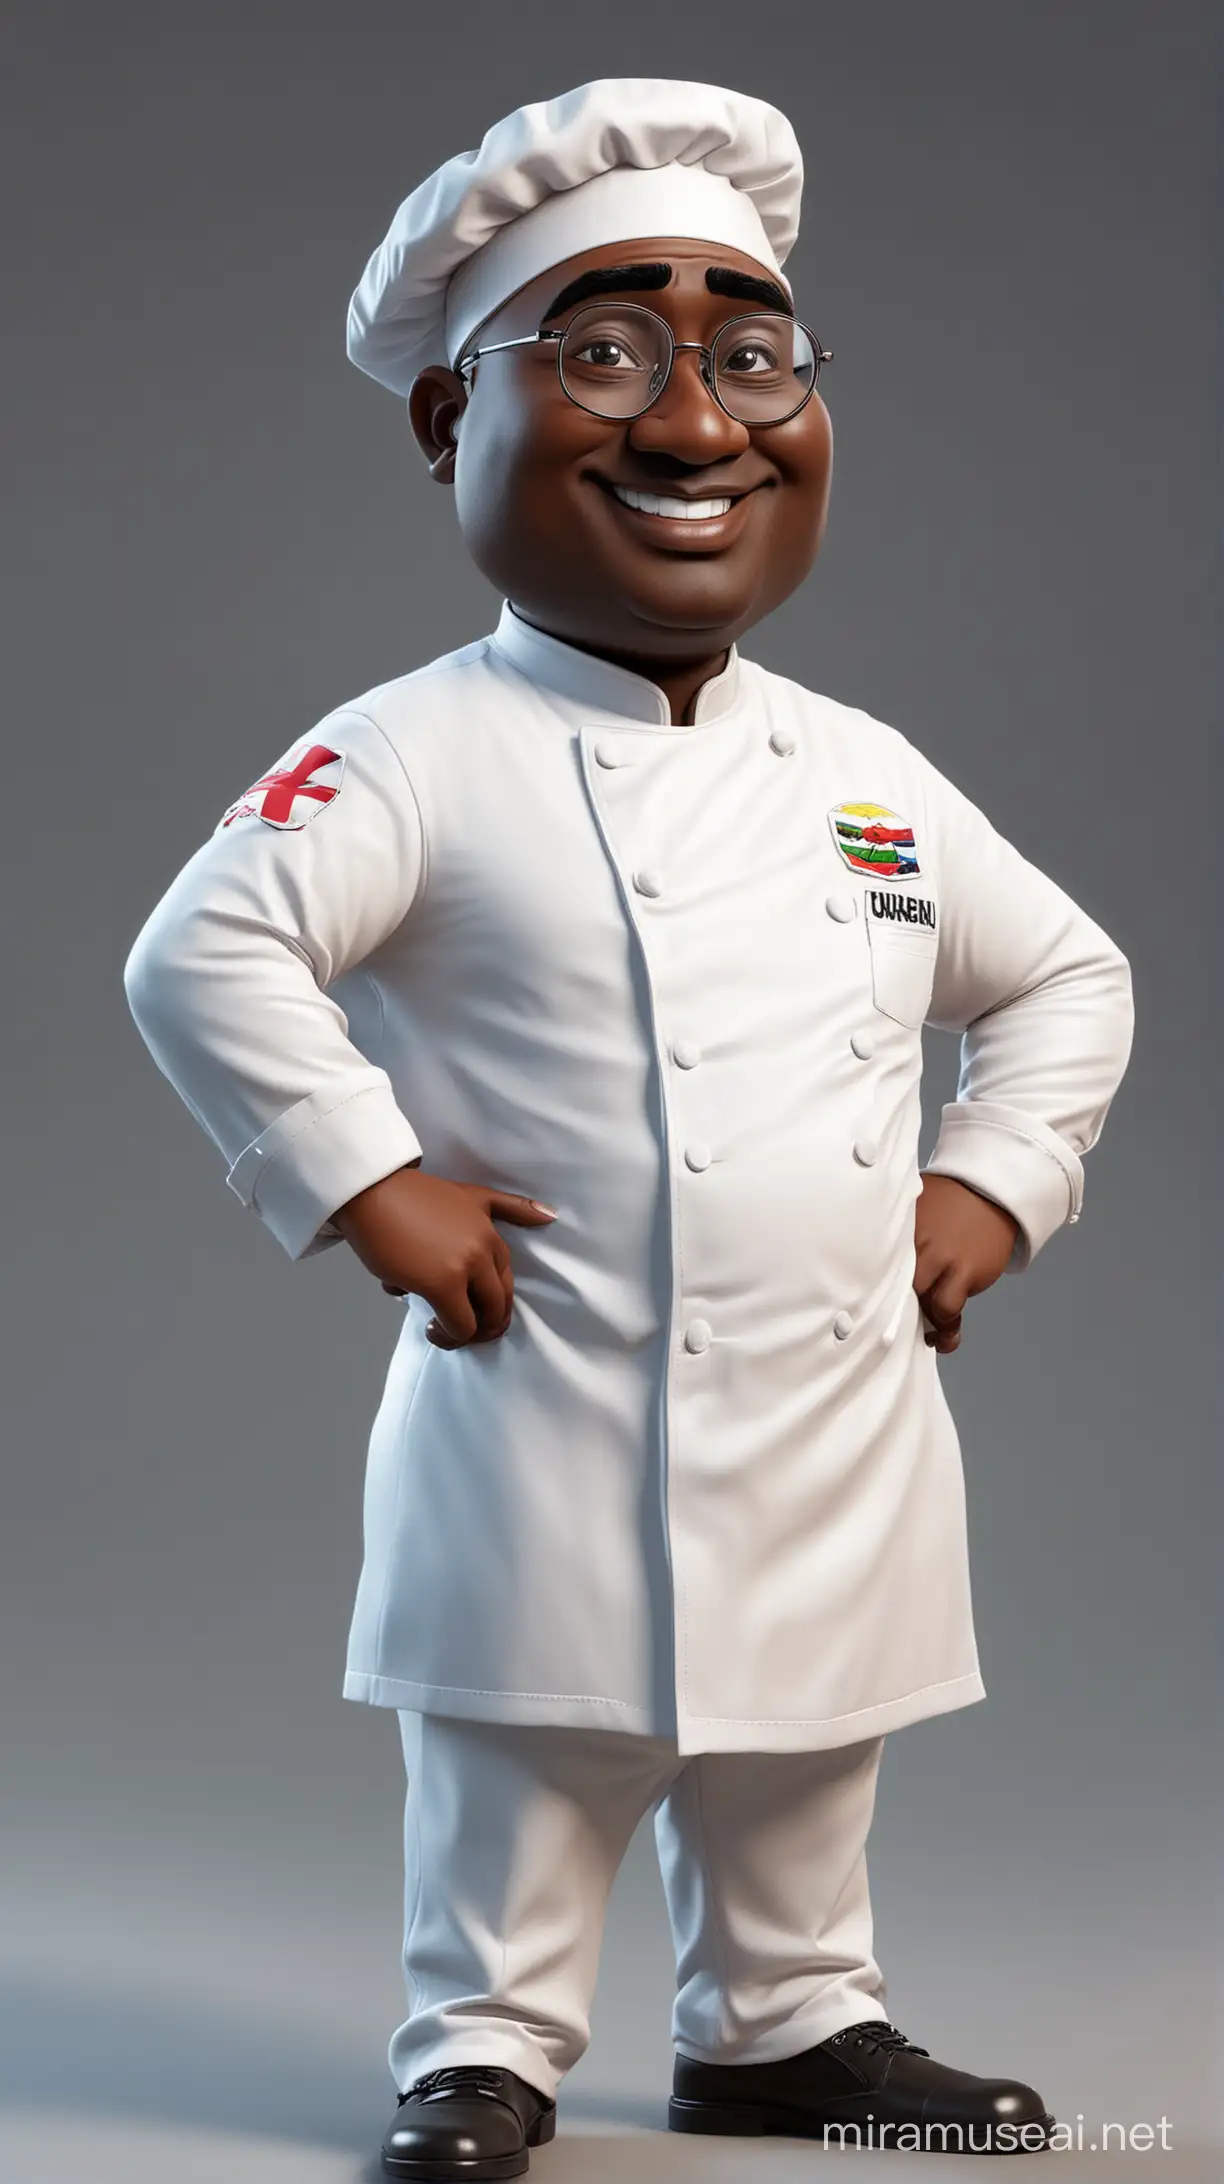 Cheerful Cartoon Chef Resembling Dr Mahamudu Bawumia Ghana Vice President Wearing Round Spectacles and Giving a Thumbs Up Gesture